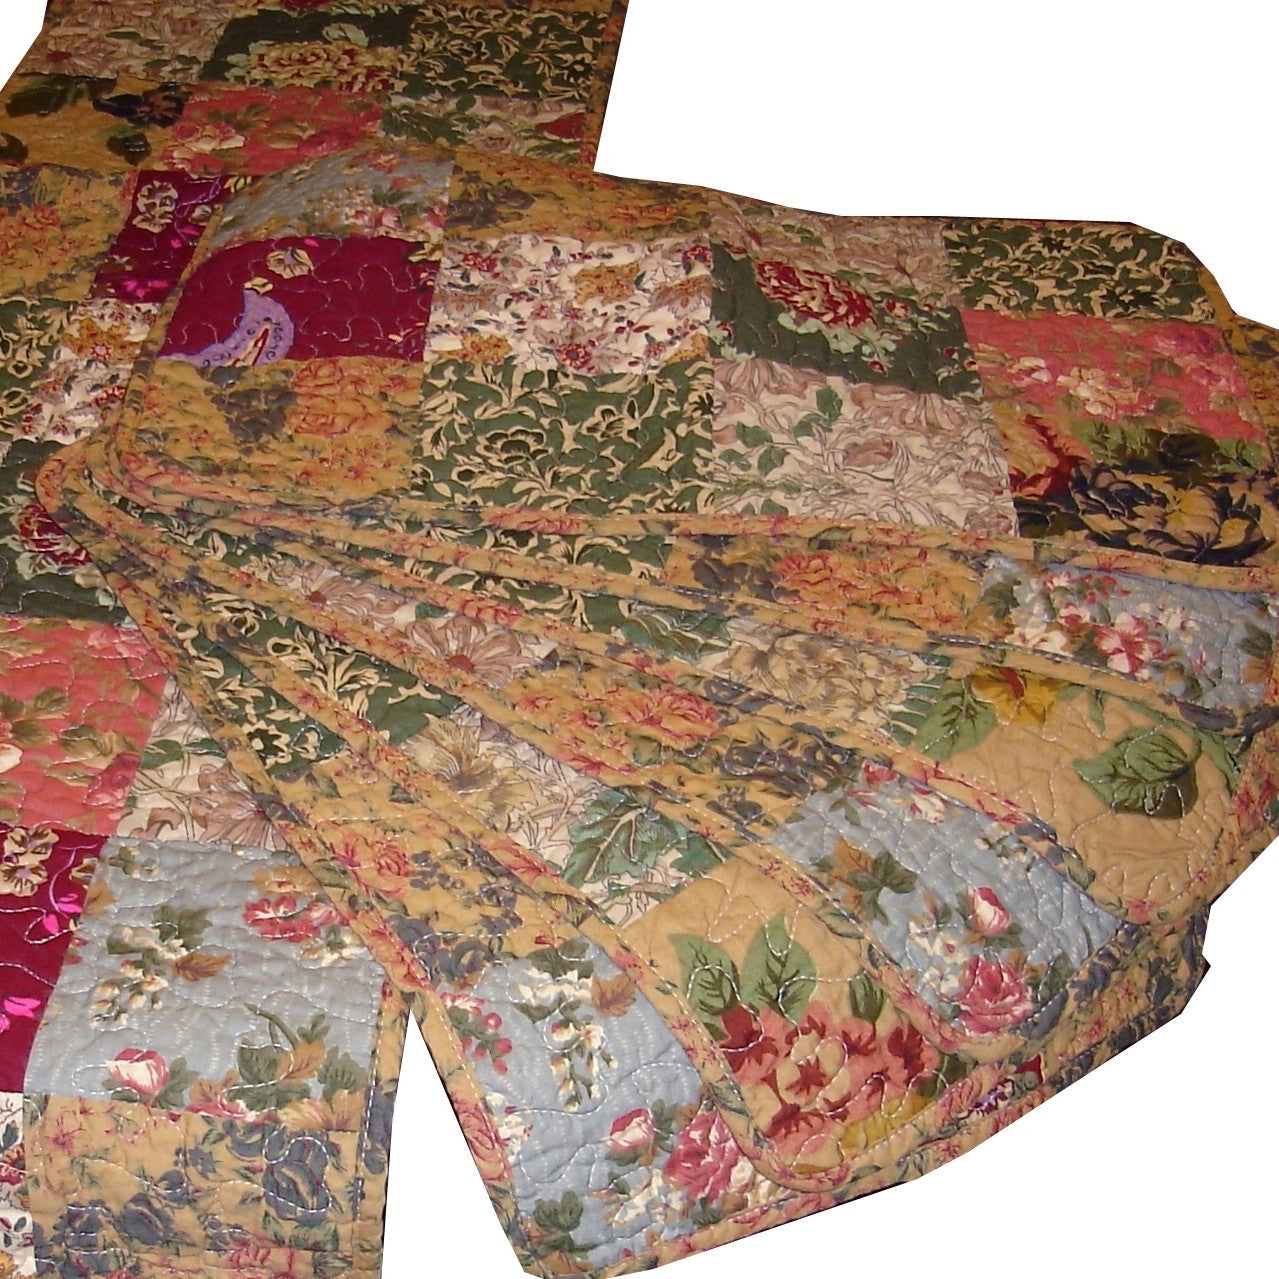 Bedroom > Quilts & Blankets - Full / Queen Size 100% Cotton Patchwork Quilt Set With Floral Paisley Pattern